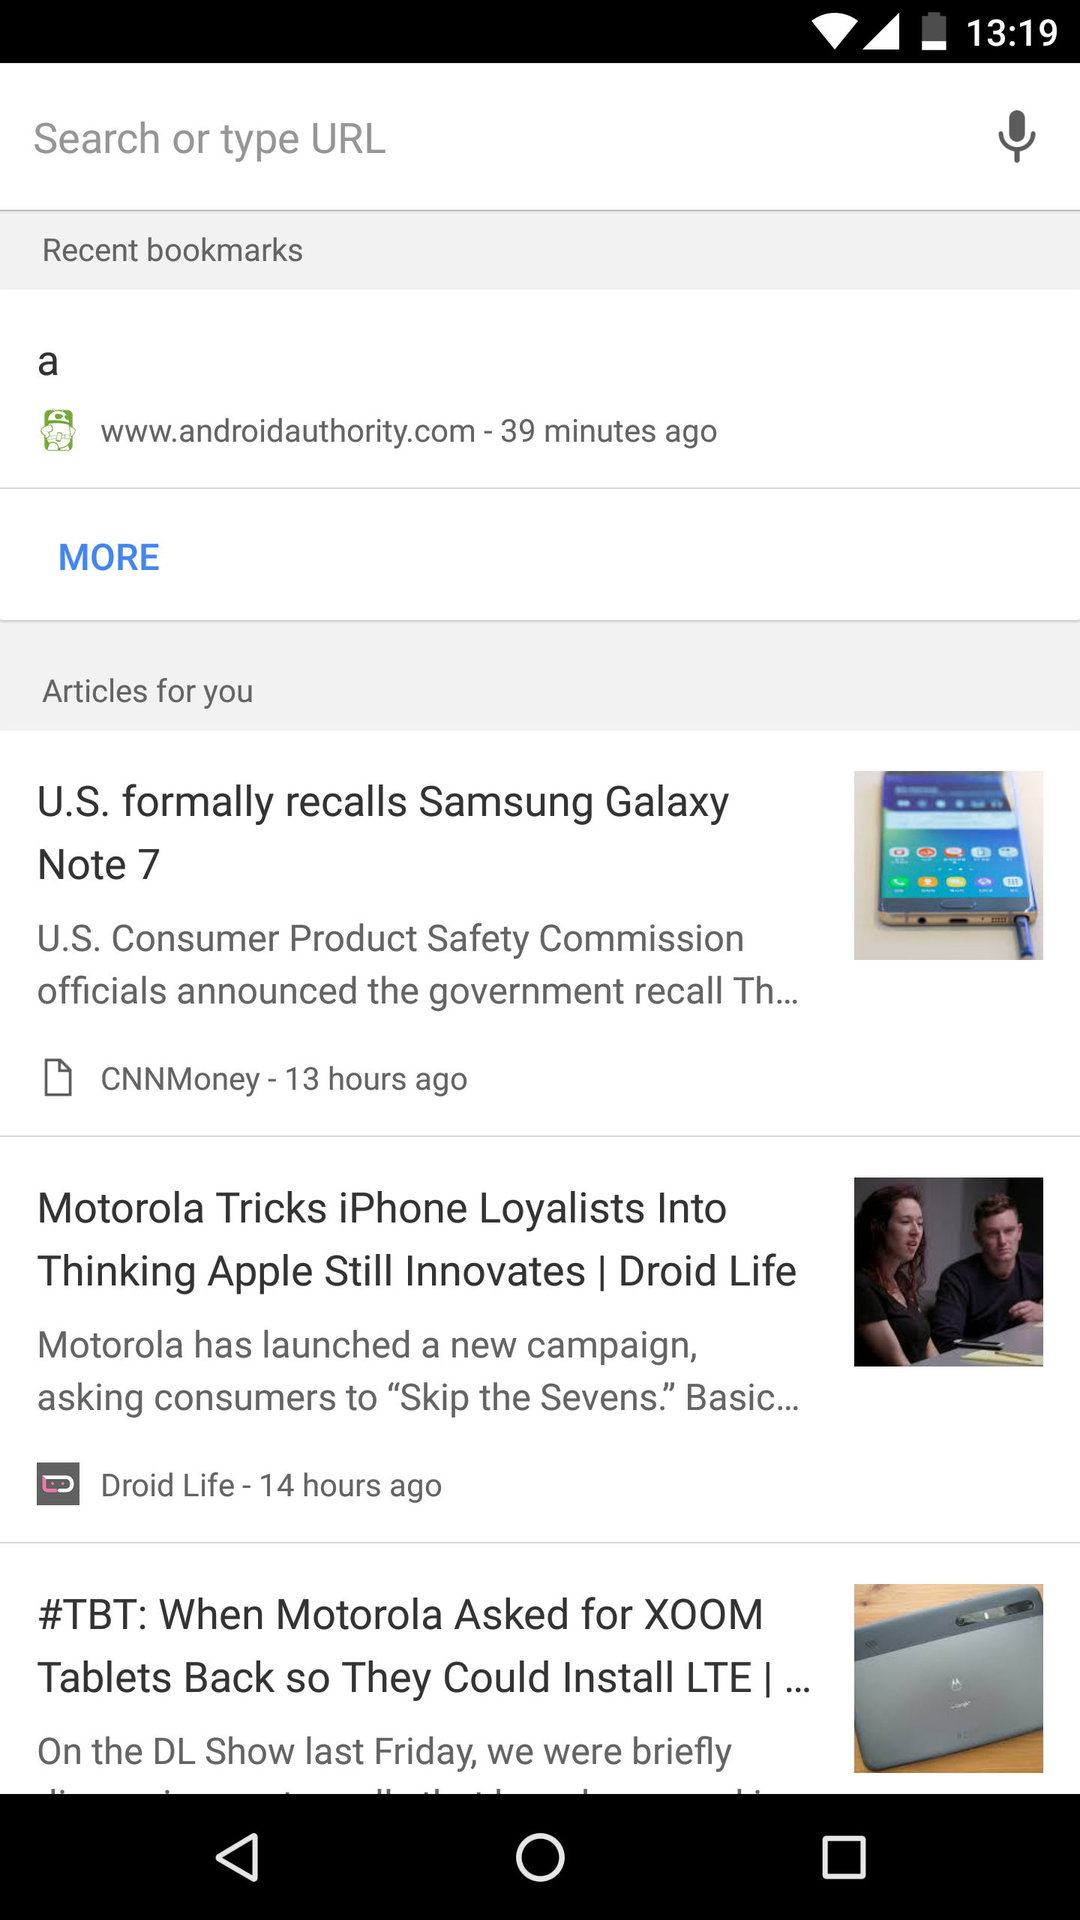 chrome 54 beta recommended articles